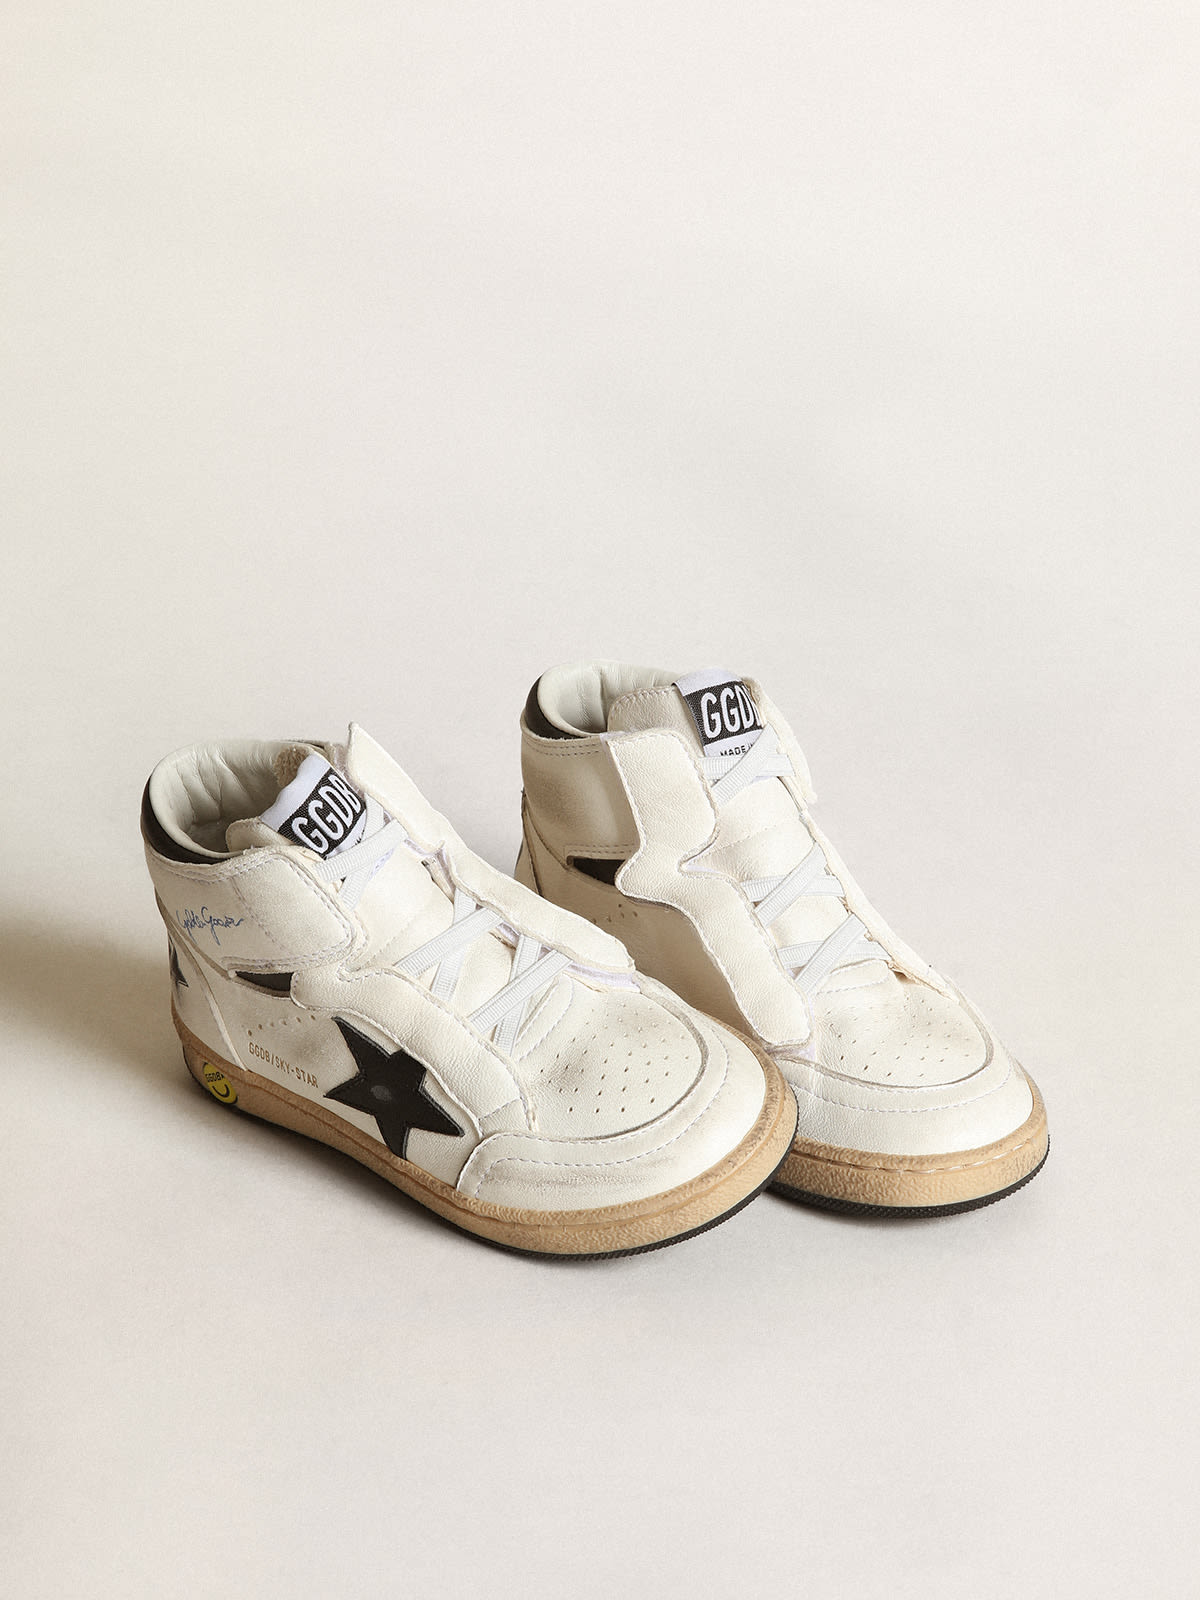 Golden Goose - Sky-Star Junior in white nappa leather with black leather star in 